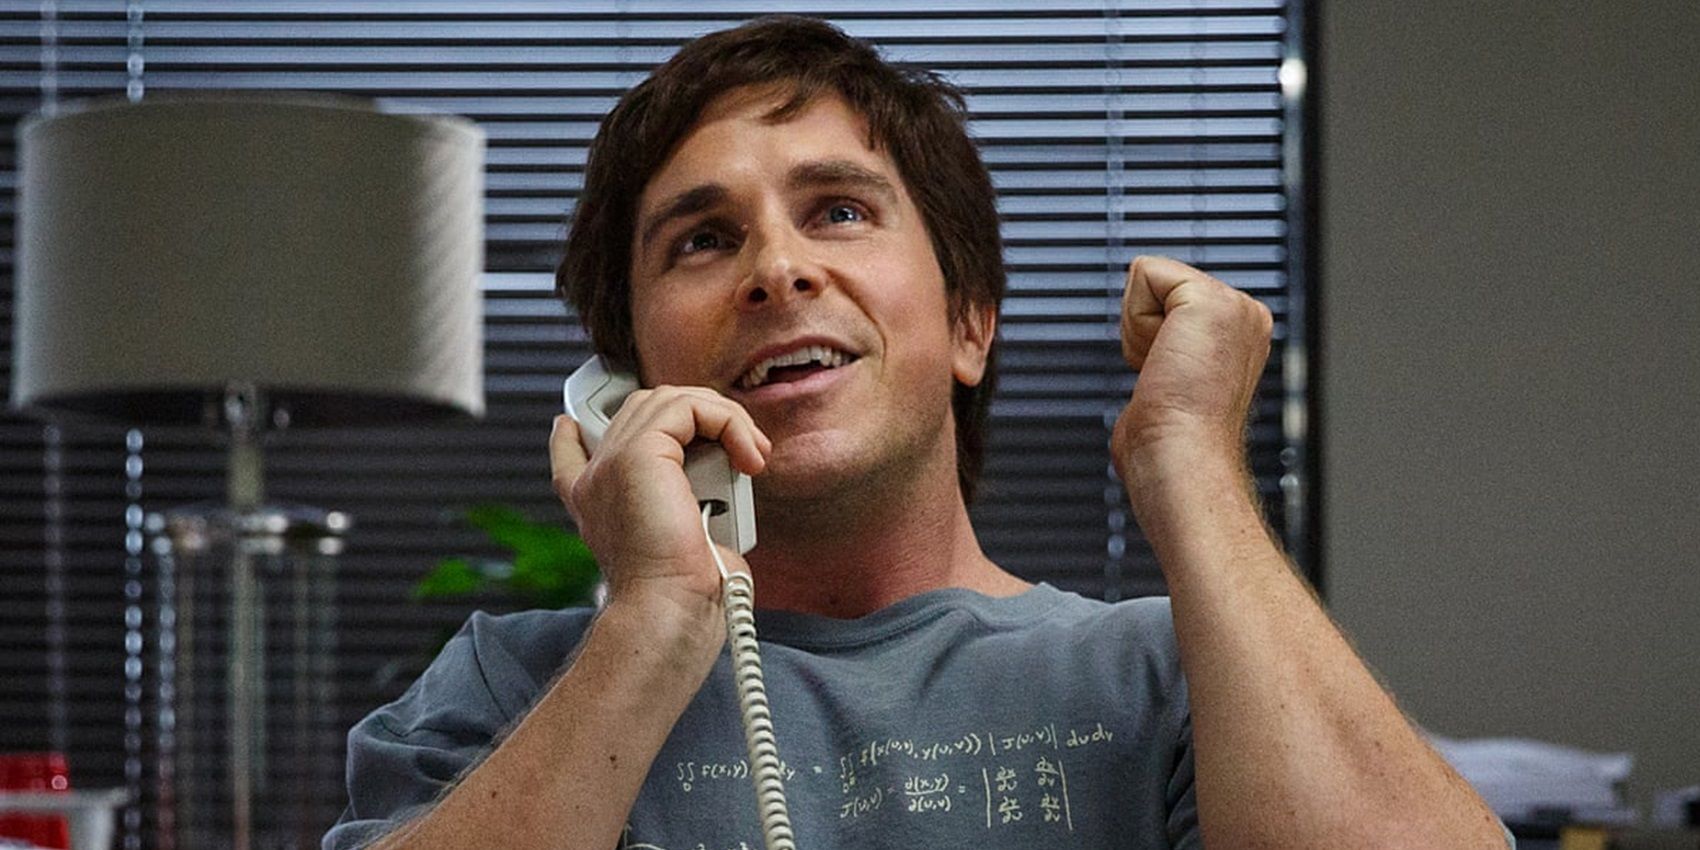 Christian Bale on the phone in The Big Short